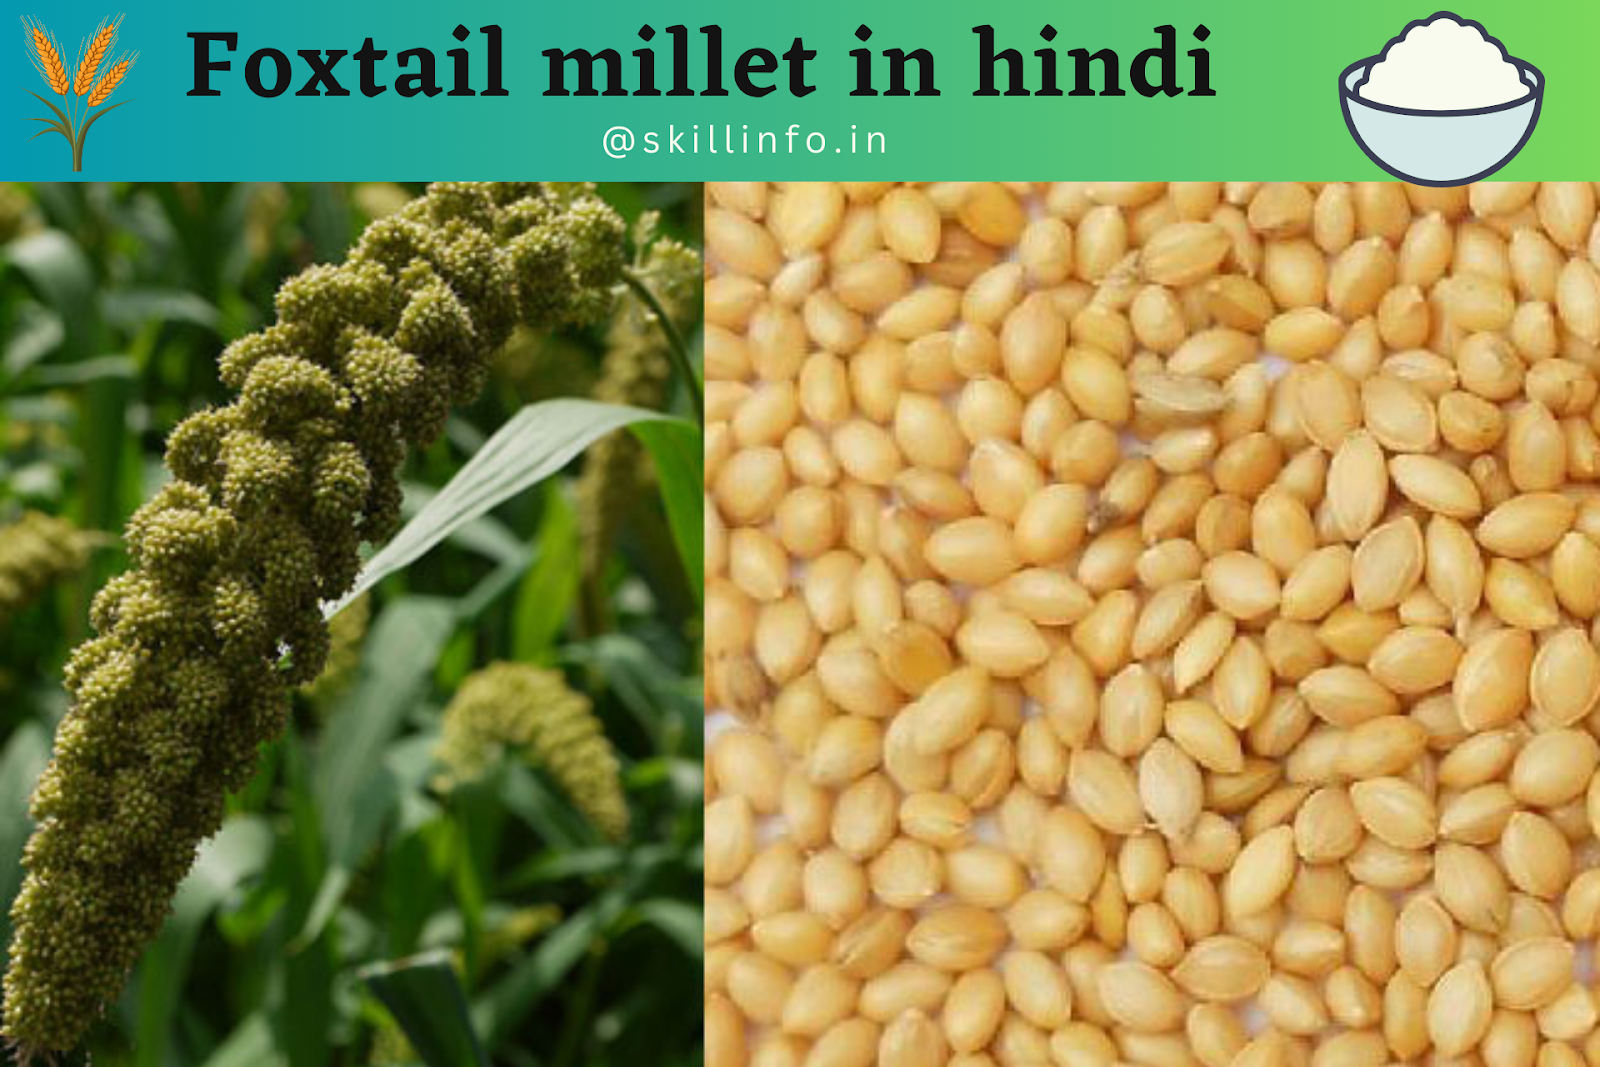 Foxtail millet in hindi